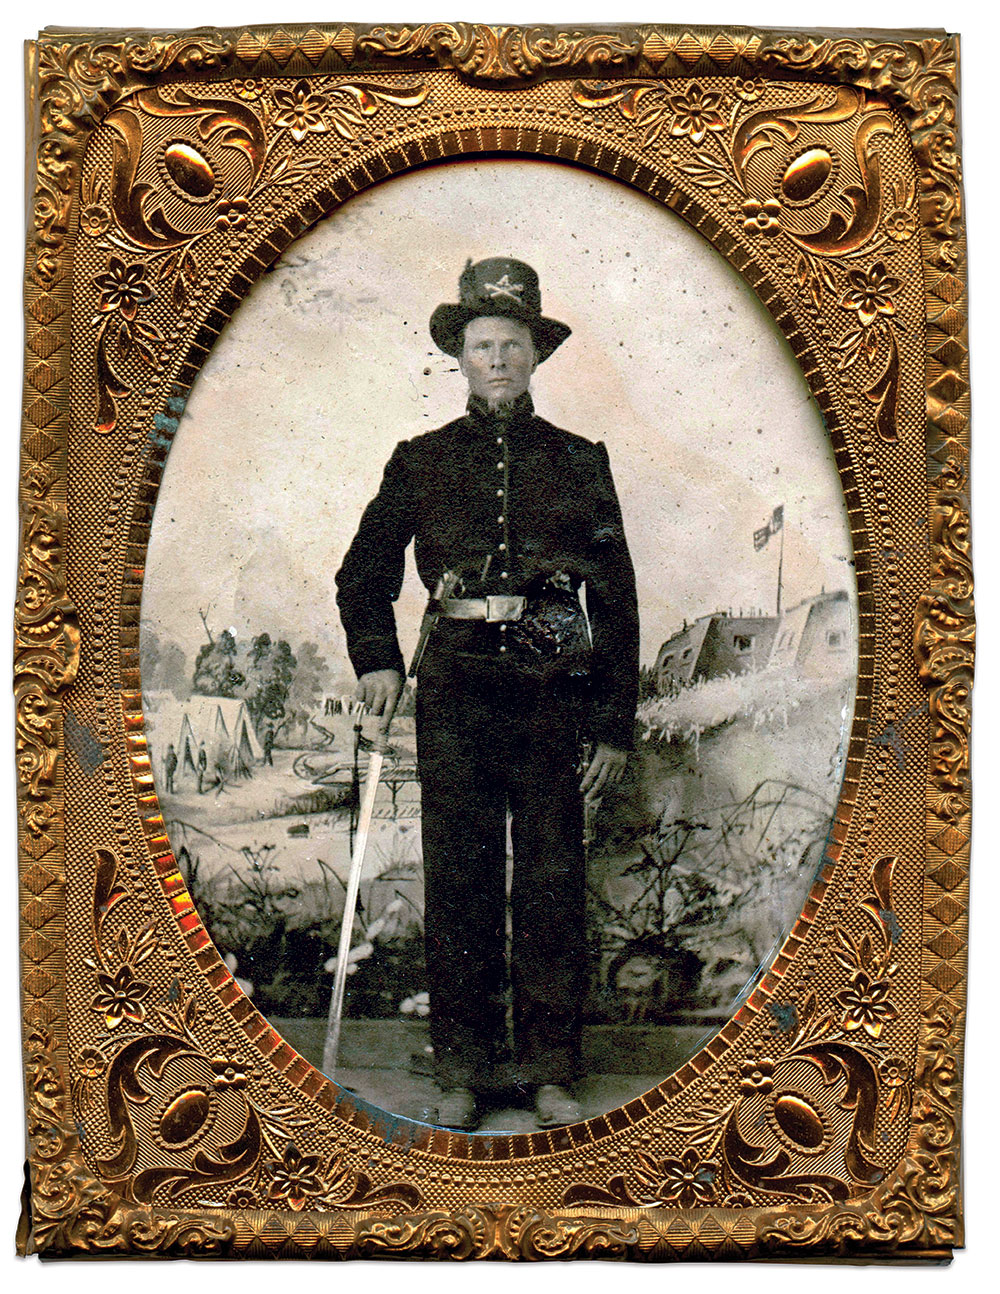 Quarter plate tintype by Ansel R. Butts of St. Louis.Paul Russinoff Collection.